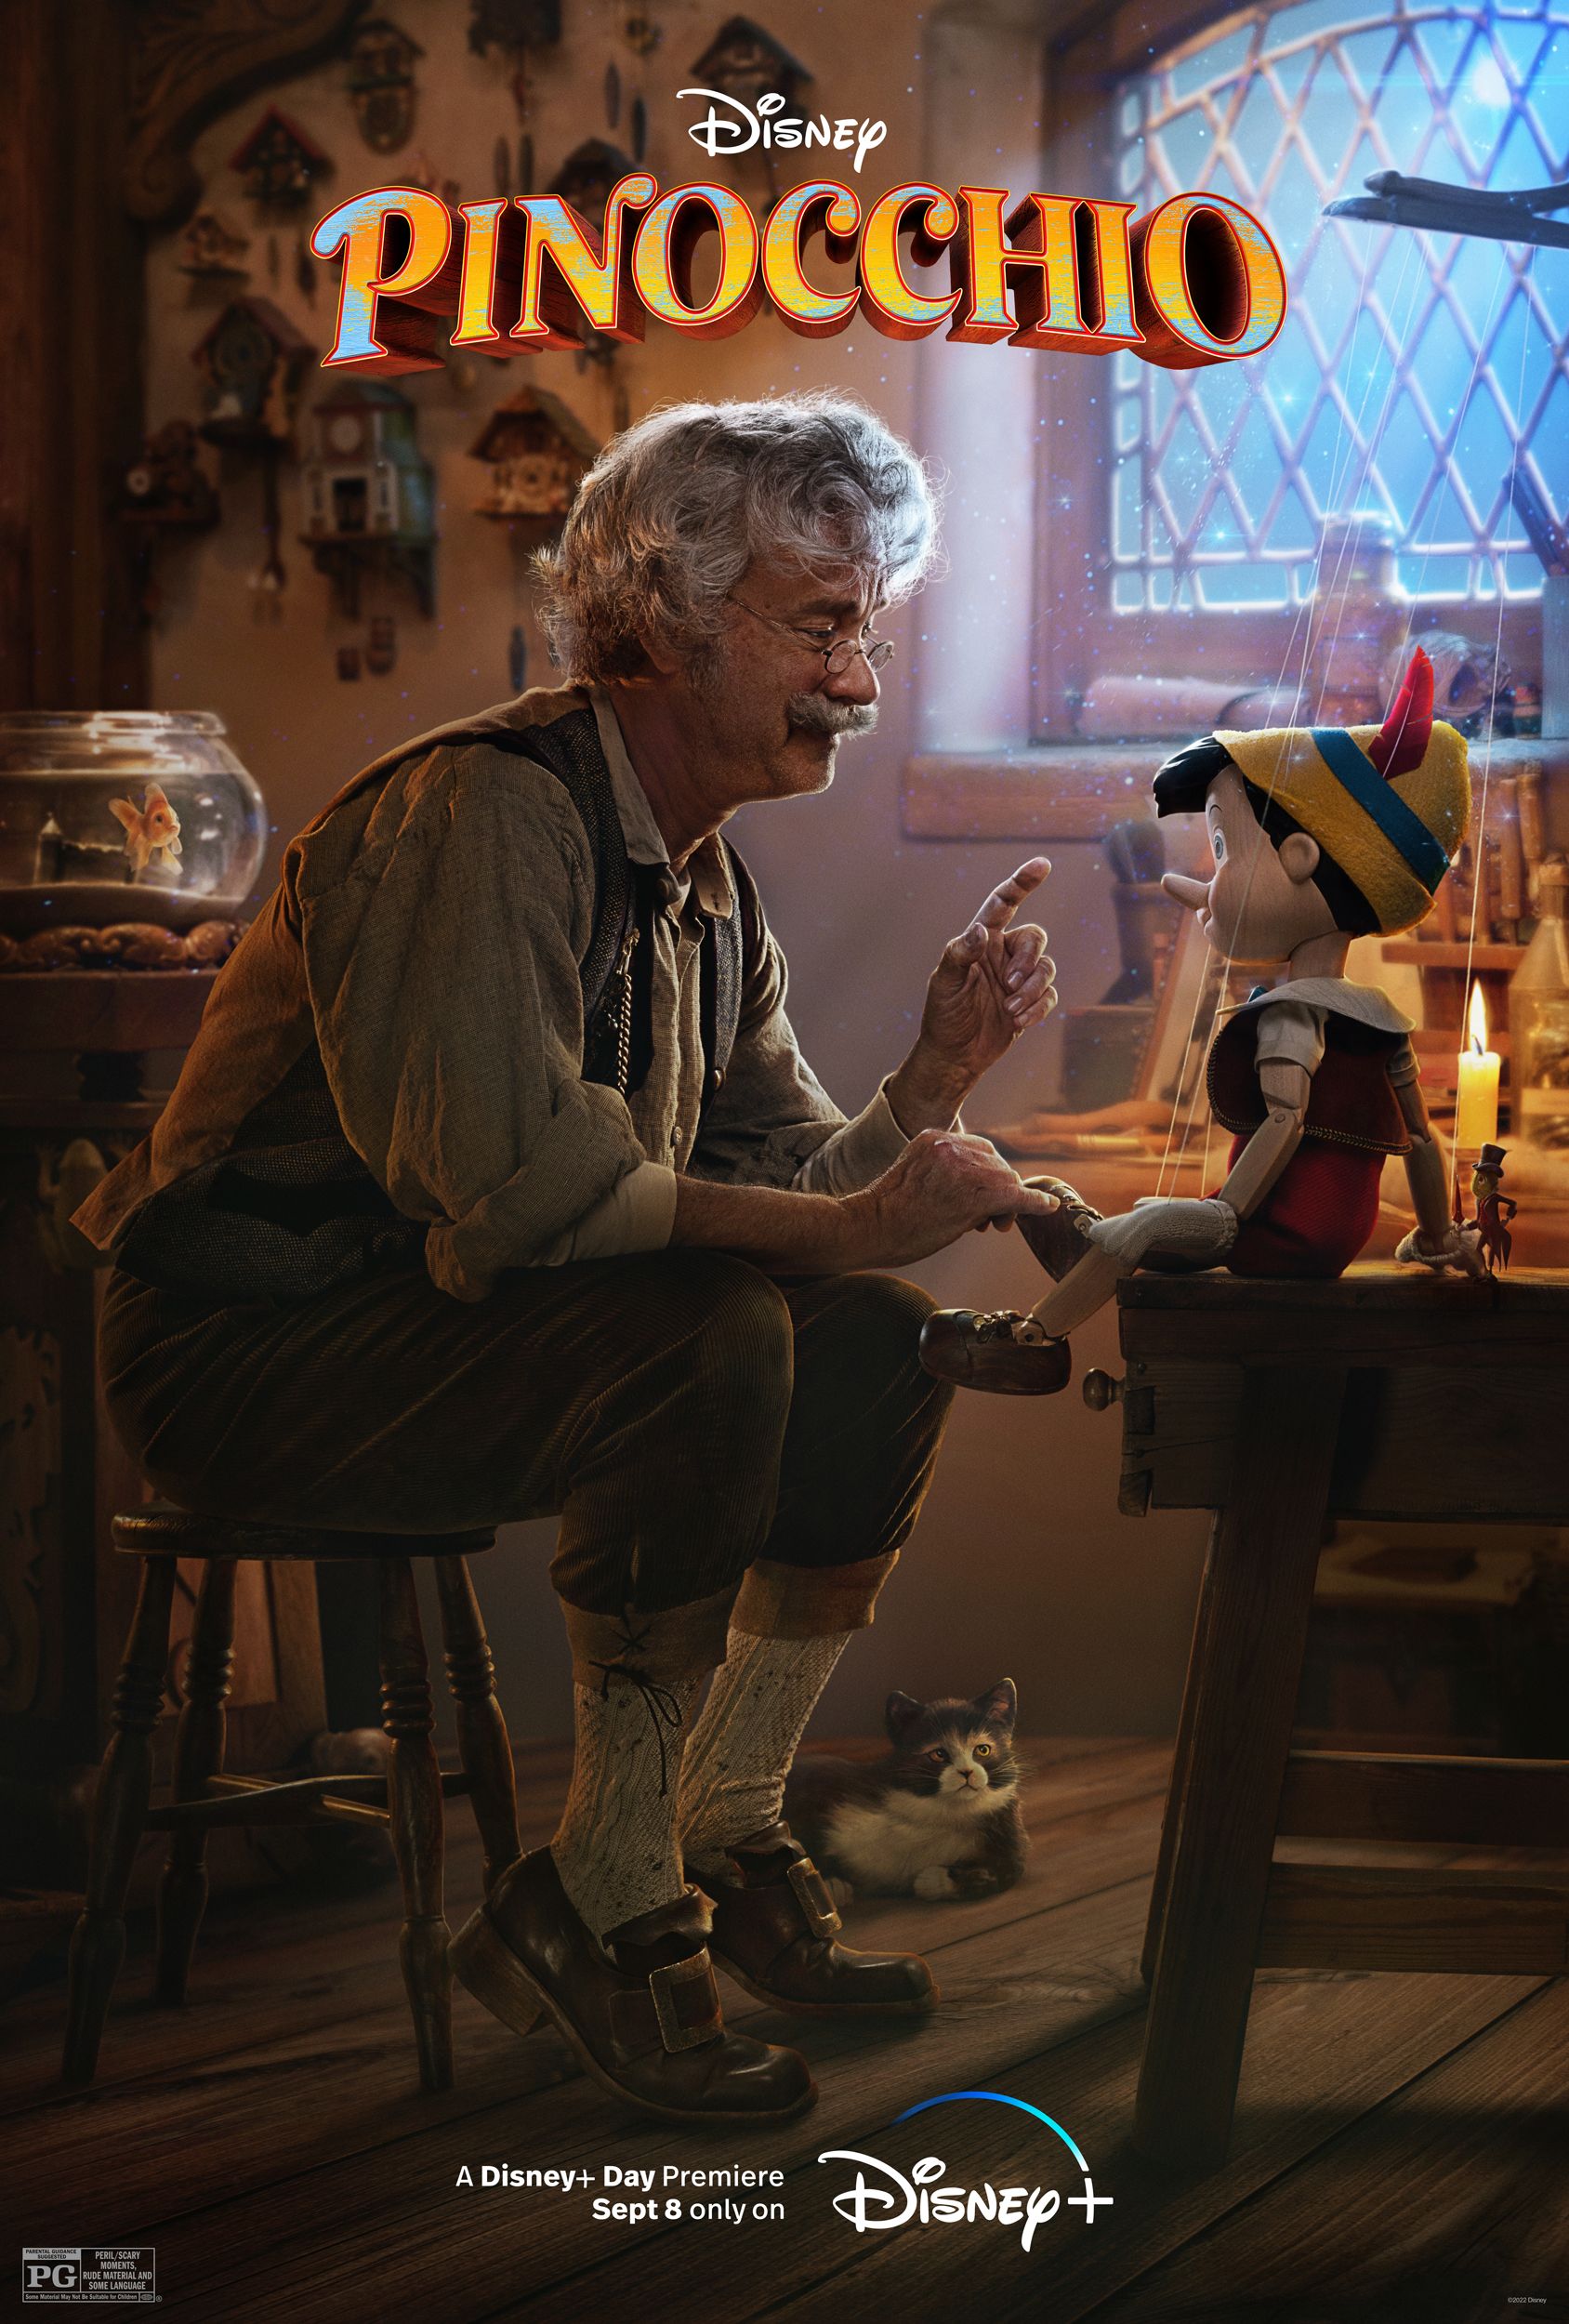 Pinocchio (2022) Review. Why is Disney’s Live-action terrible?